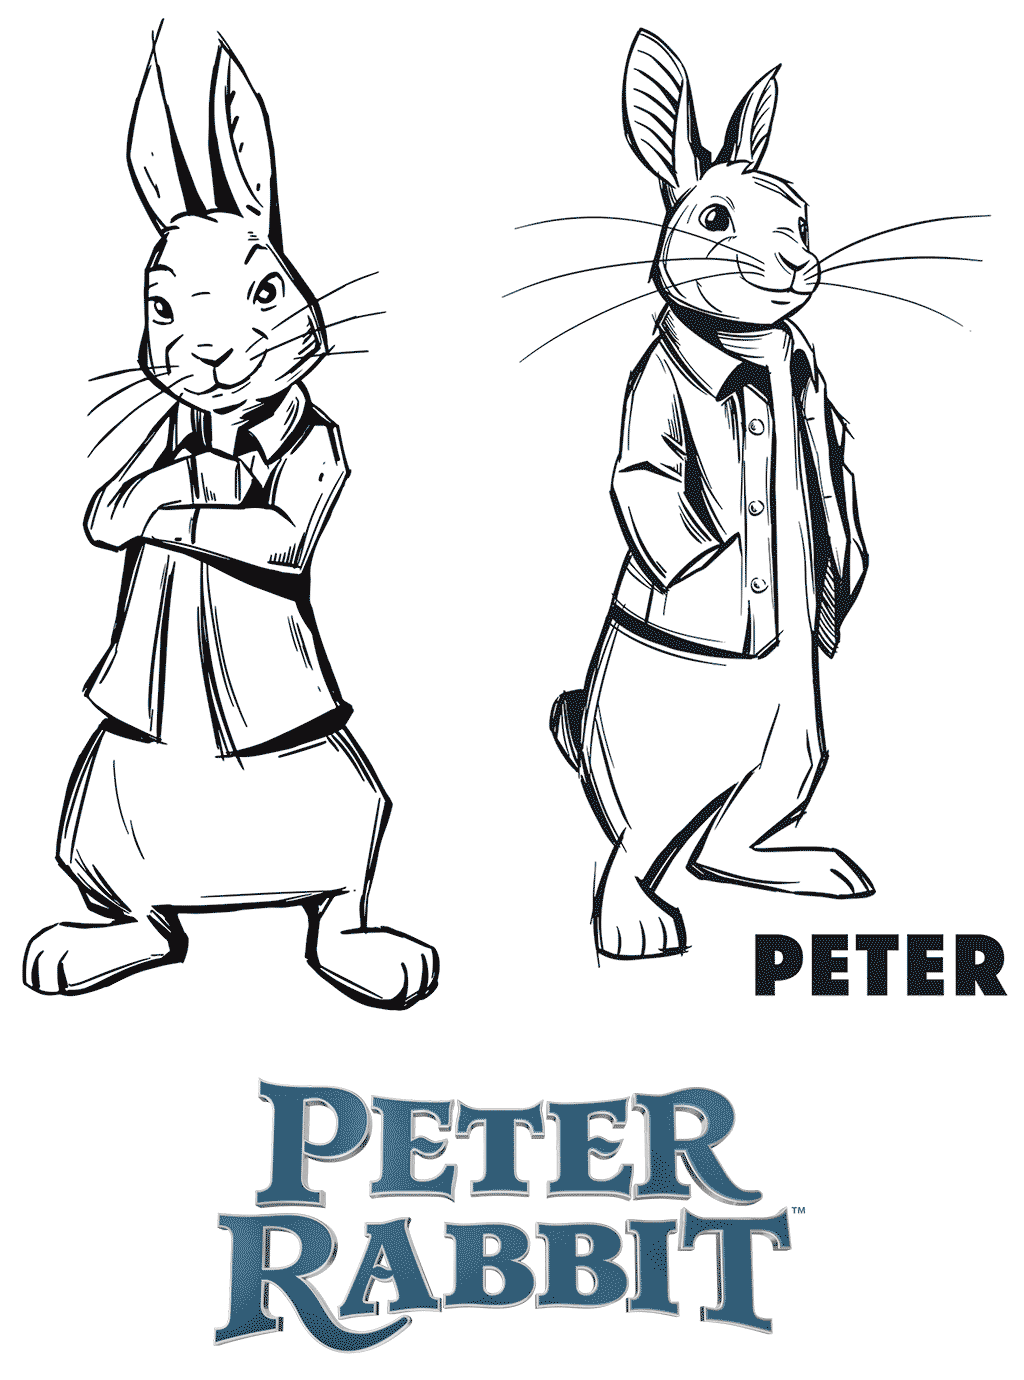 Peter Rabbit Movie Sketch Coloring Page